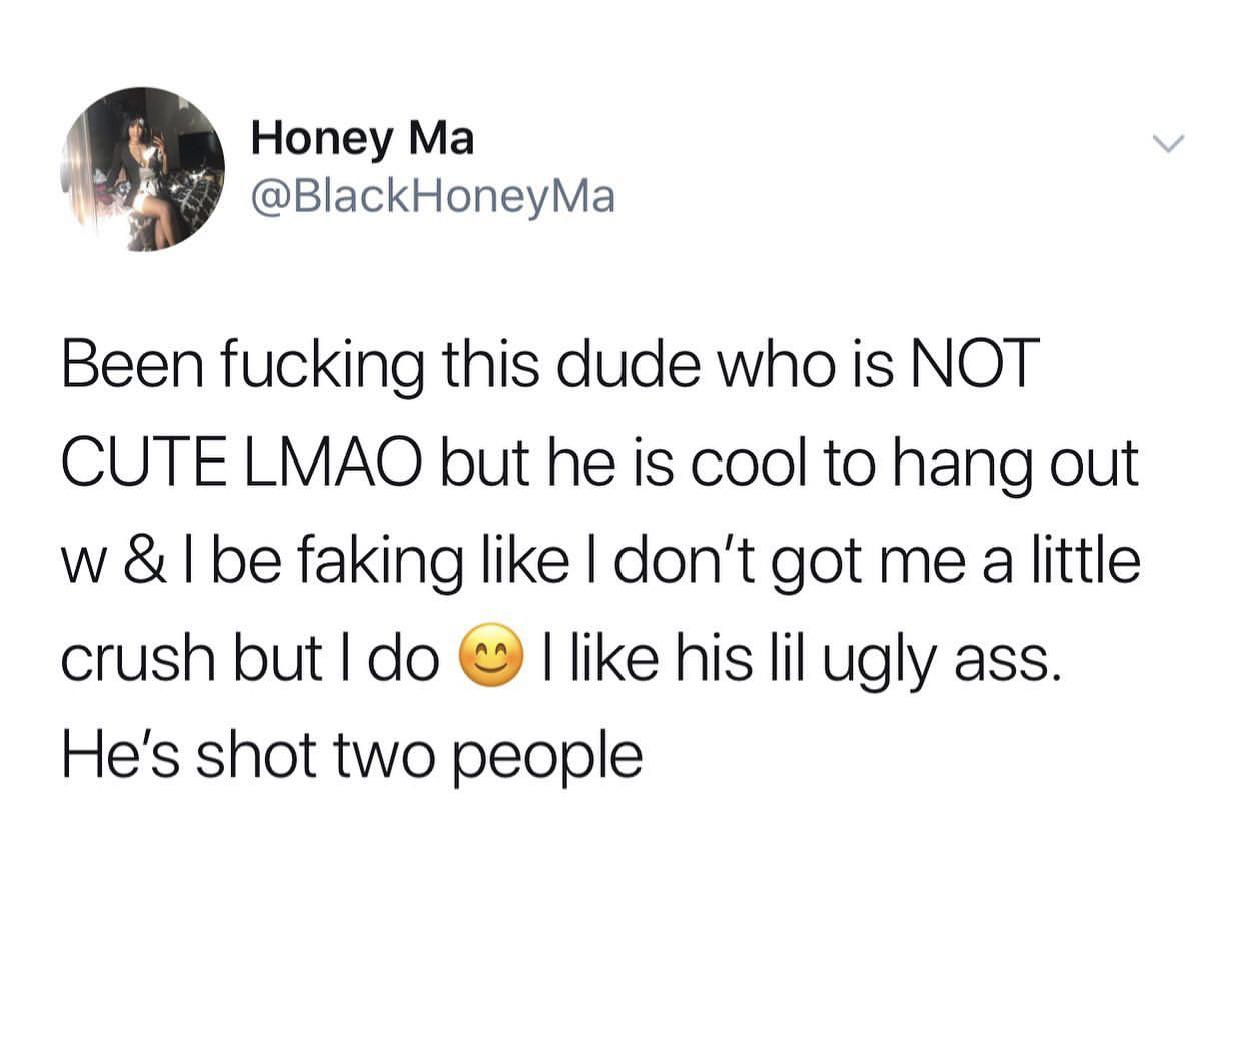 Honey Ma Ma Been fucking this dude who is Not Cute Lmao but he is cool to hang out w&l be faking I don't got me a little crush but I do I his lil ugly ass. He's shot two people